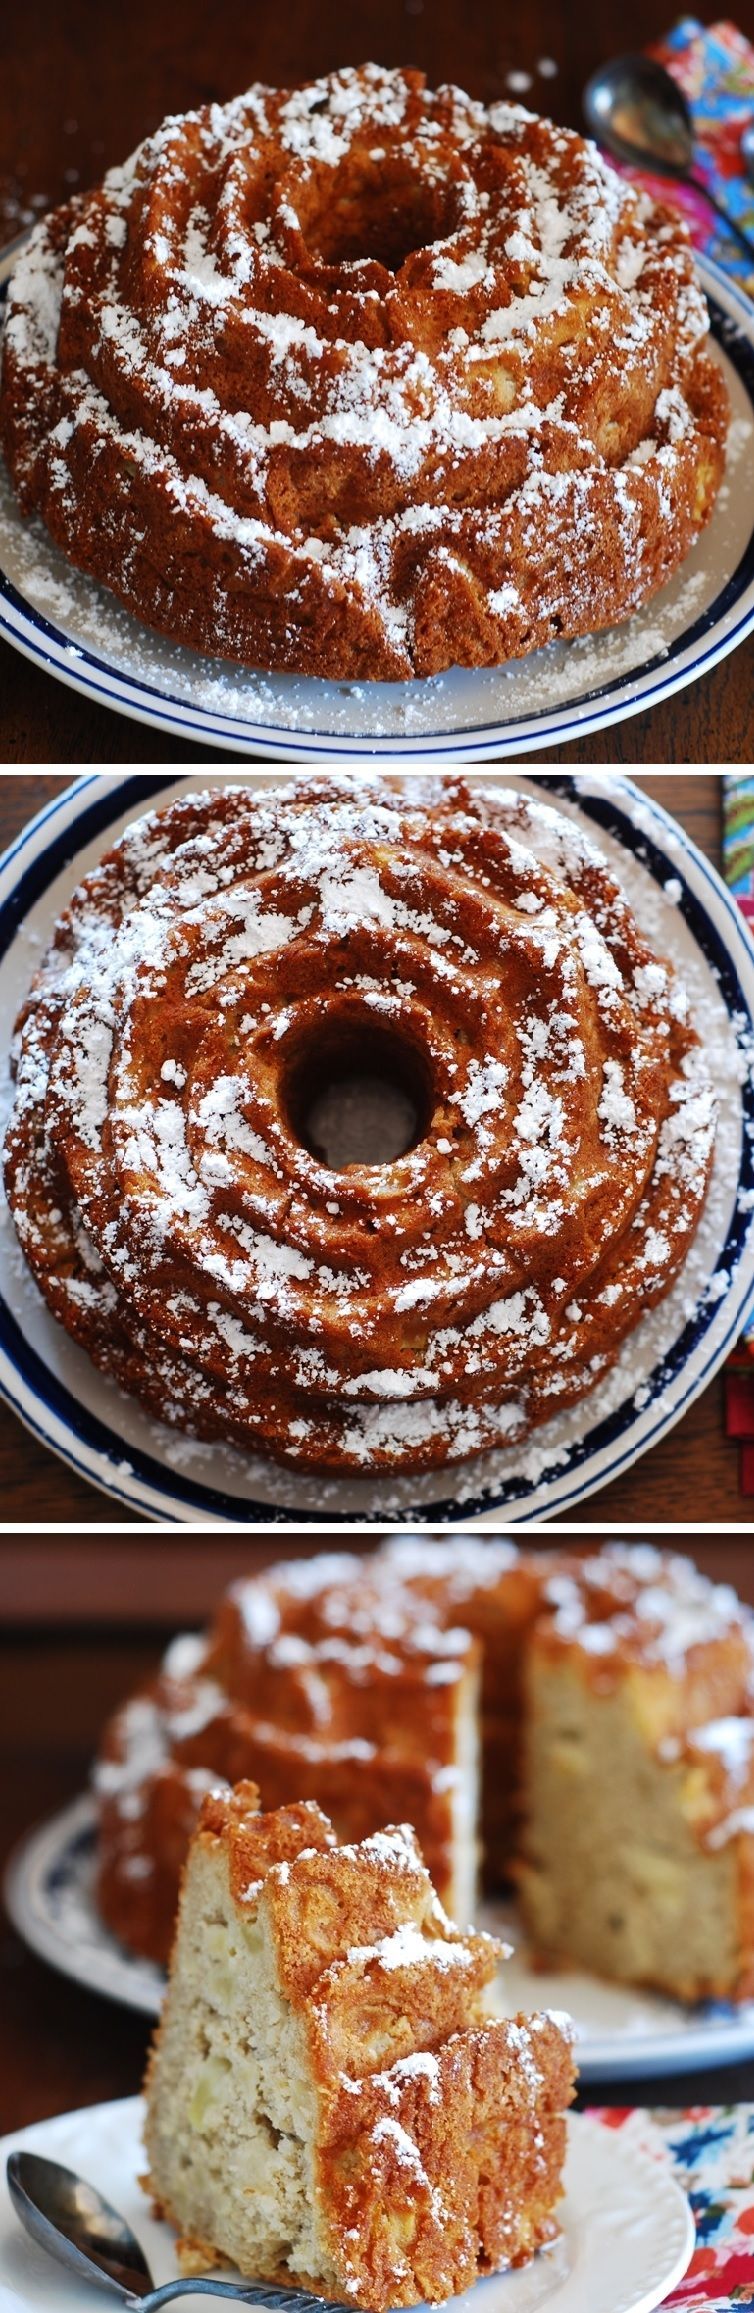 Apple cinnamon buttermilk cake. Perfect coffee cake to have in the morning with a cup of tea or coffee! #summer_recipes